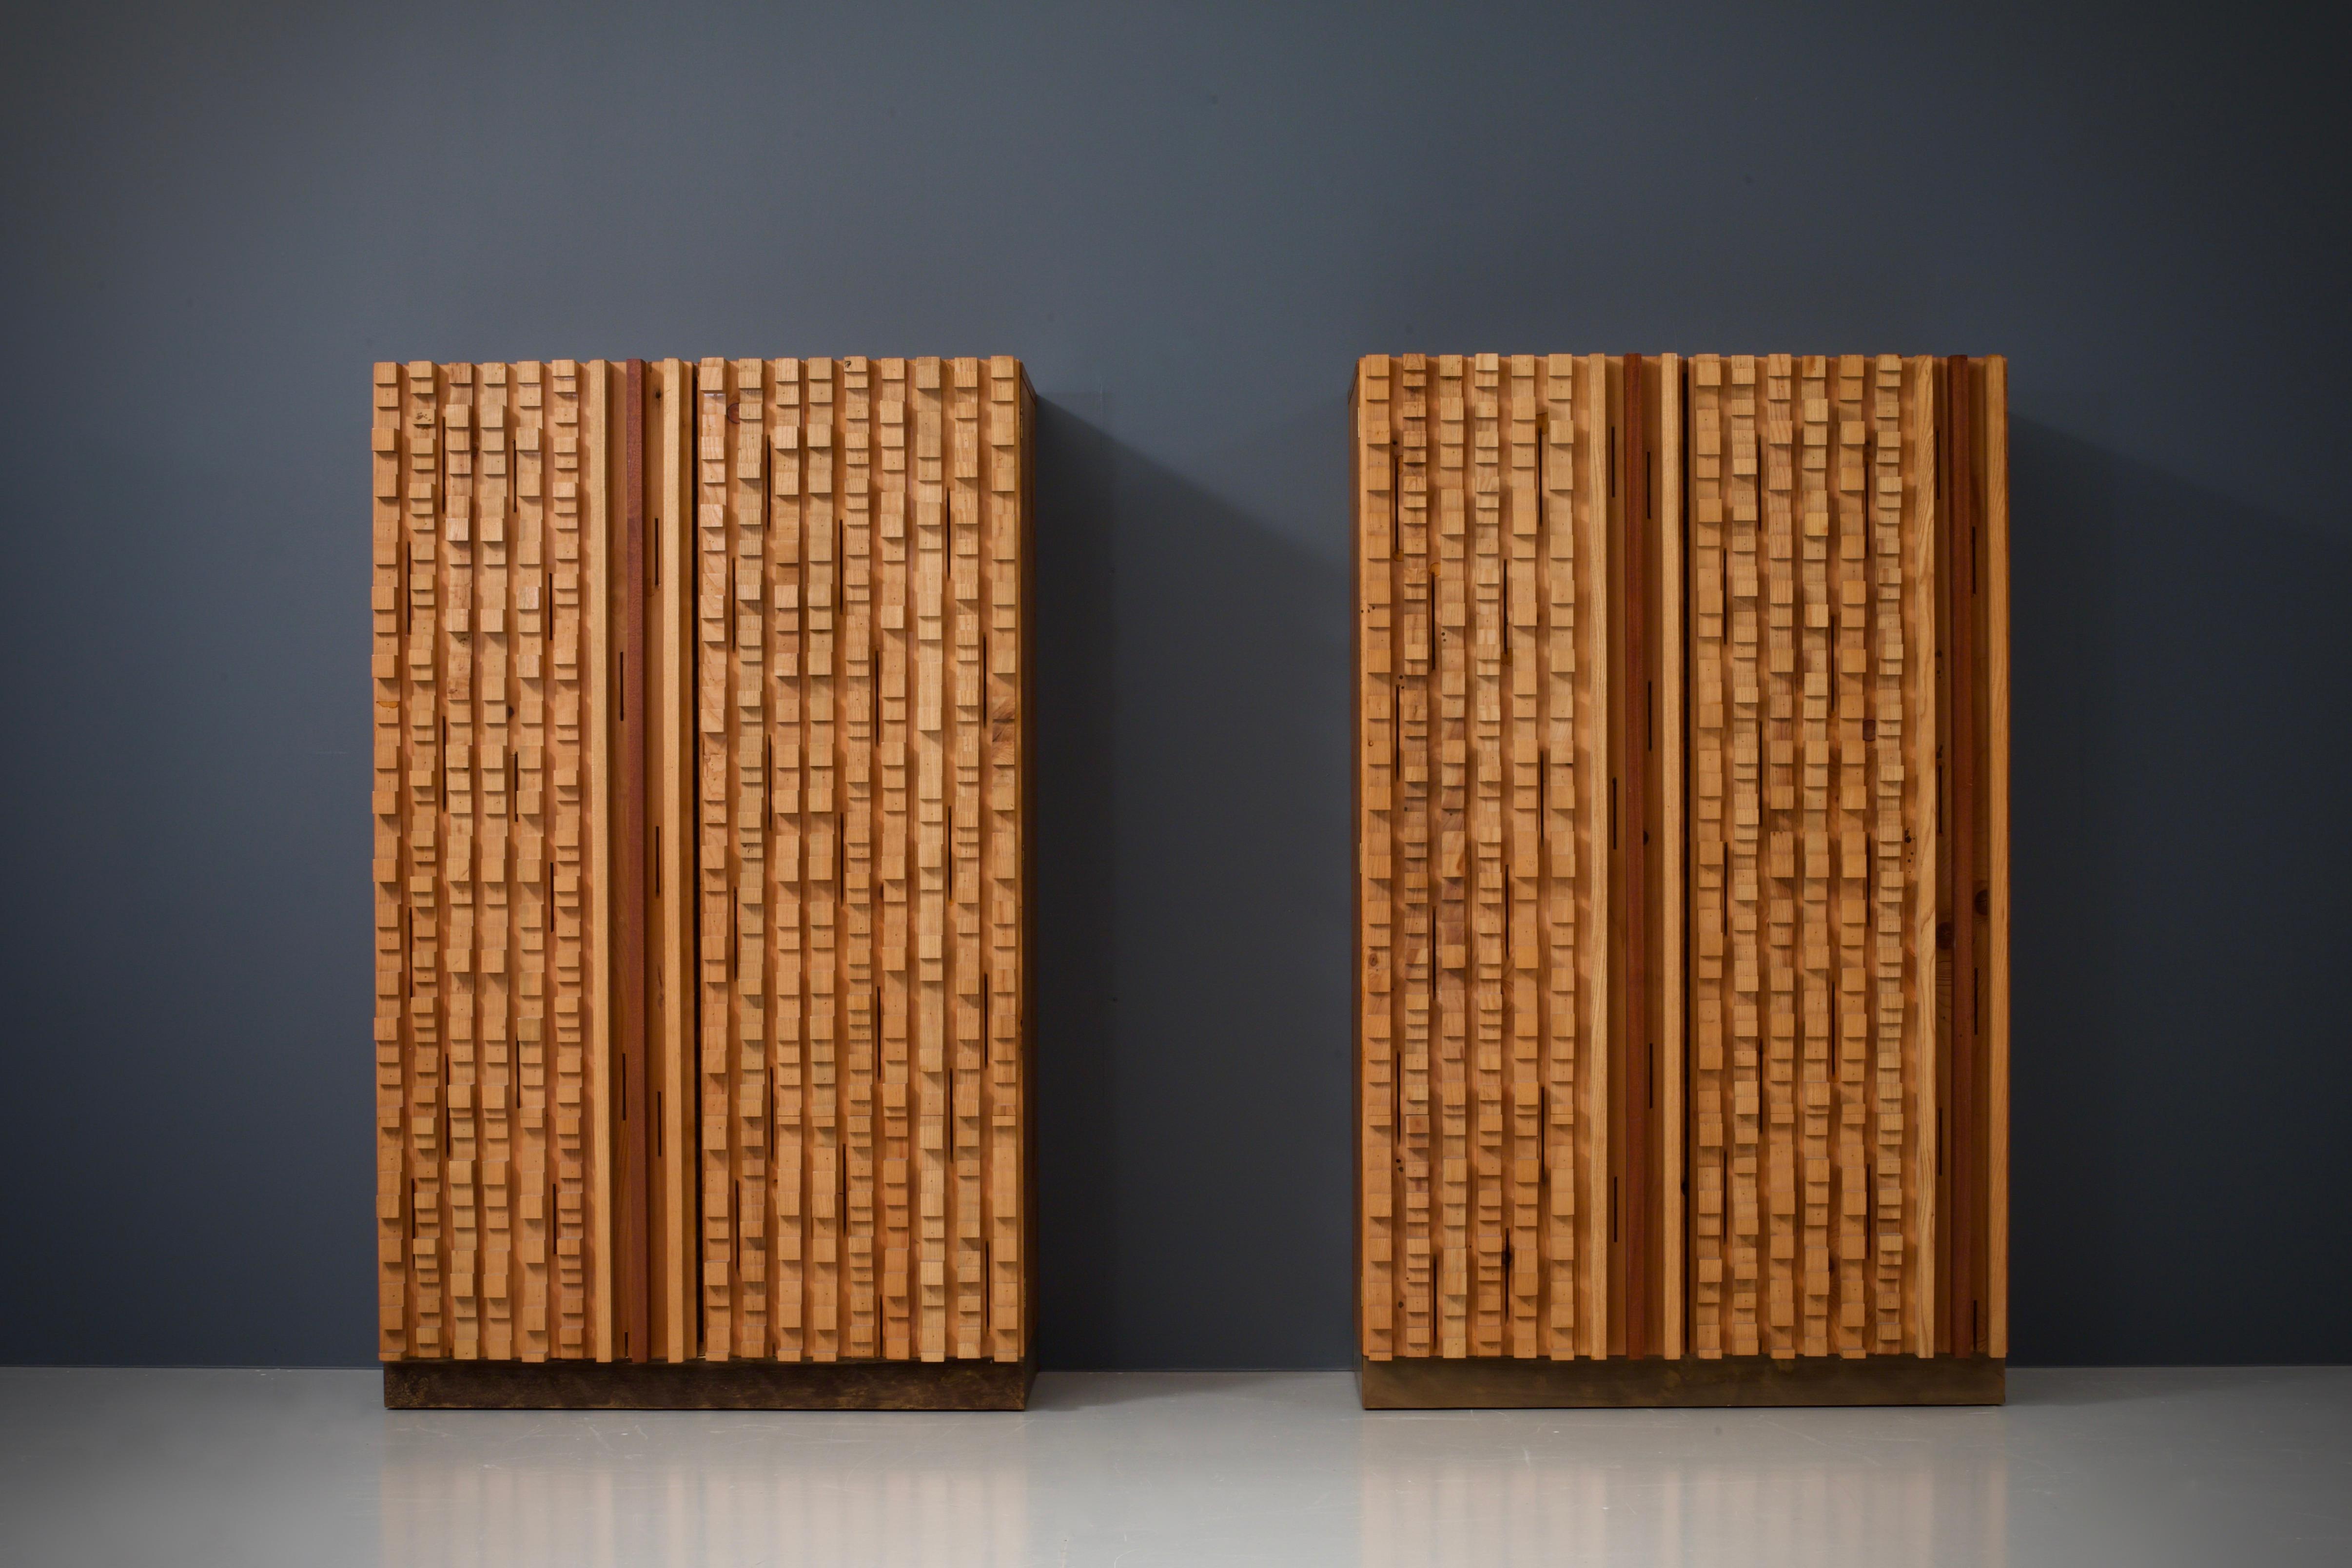 Set of 3 Wall Panels and 2 Cabinets by Stefano d'Amico, Italy, 1975 For Sale 6